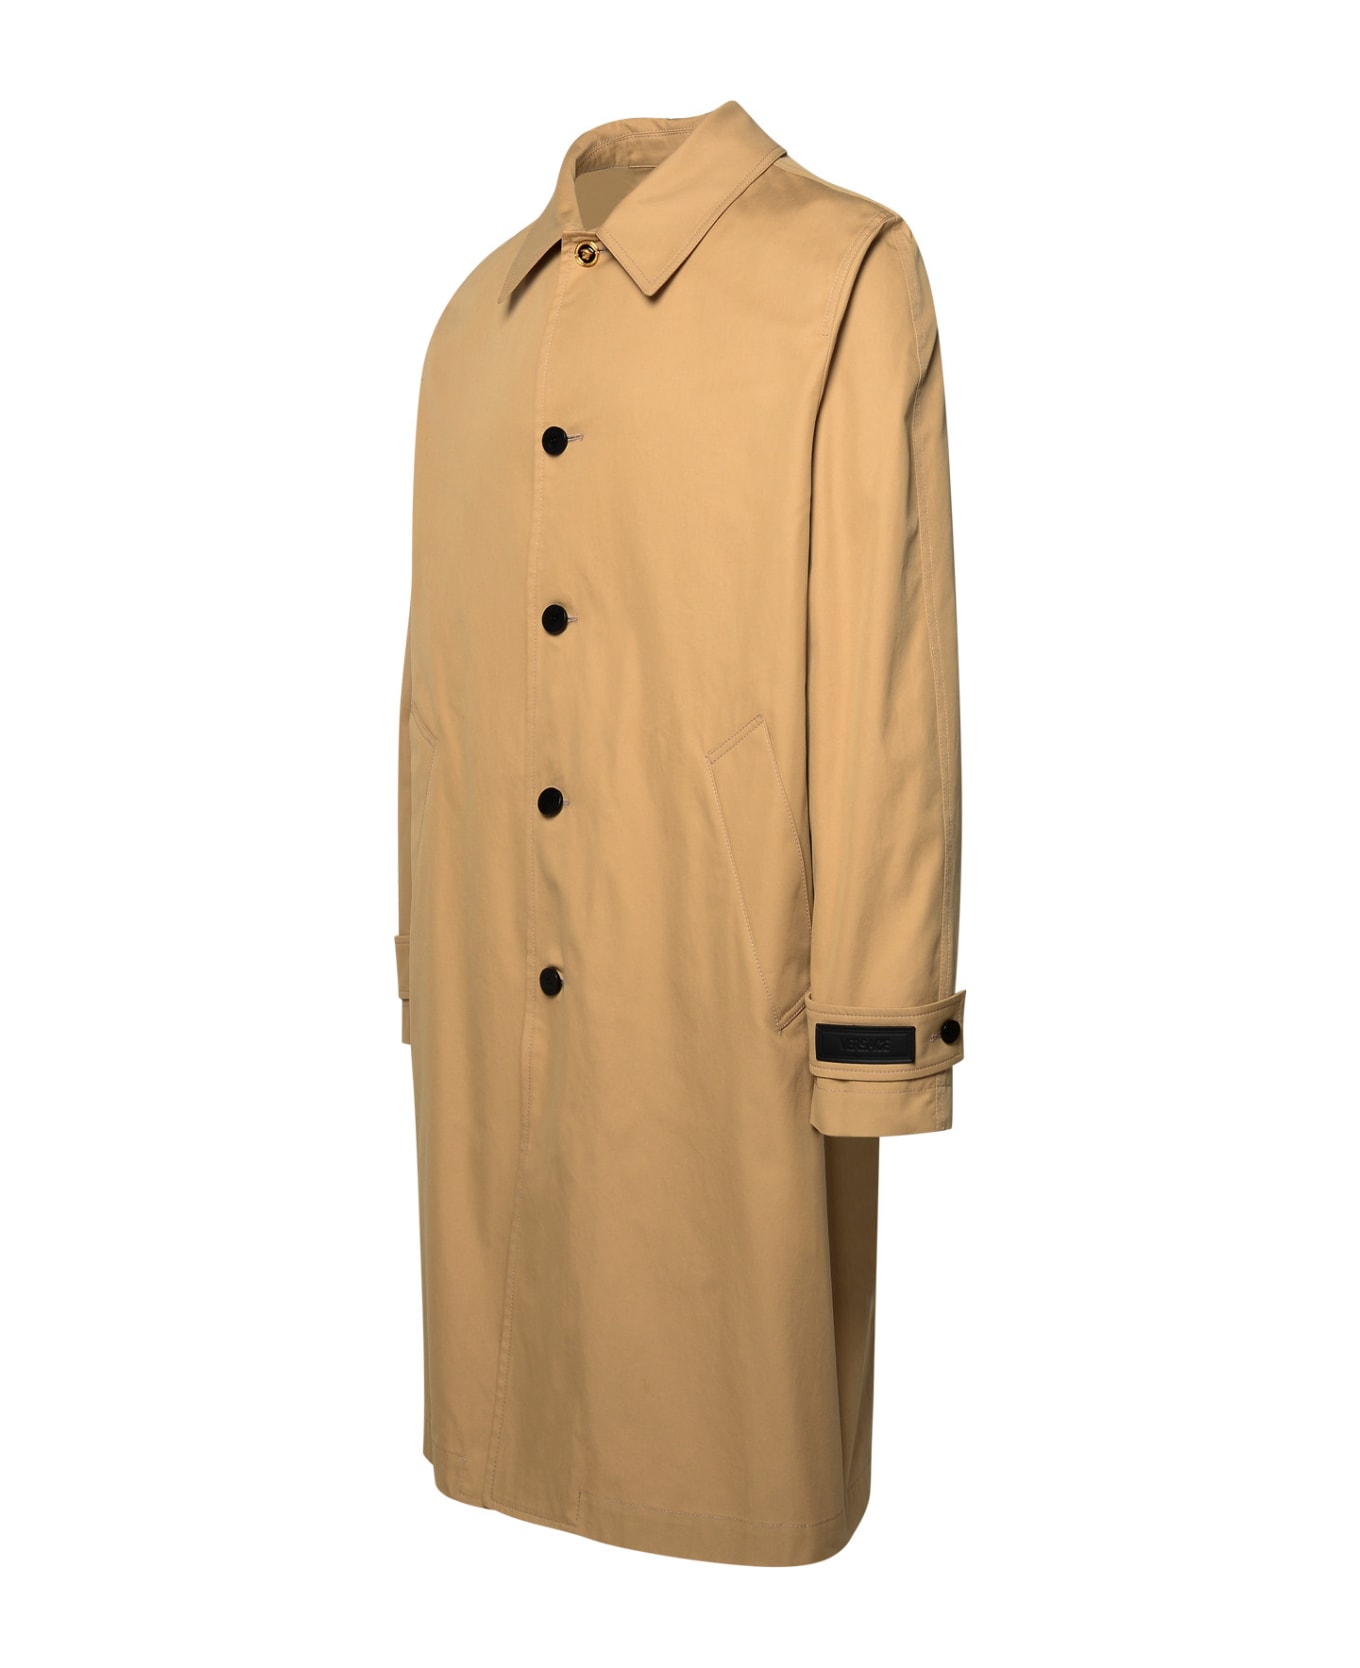 Versace 'barocco' Beige Cotton And Silk Trench Coat - Champagne